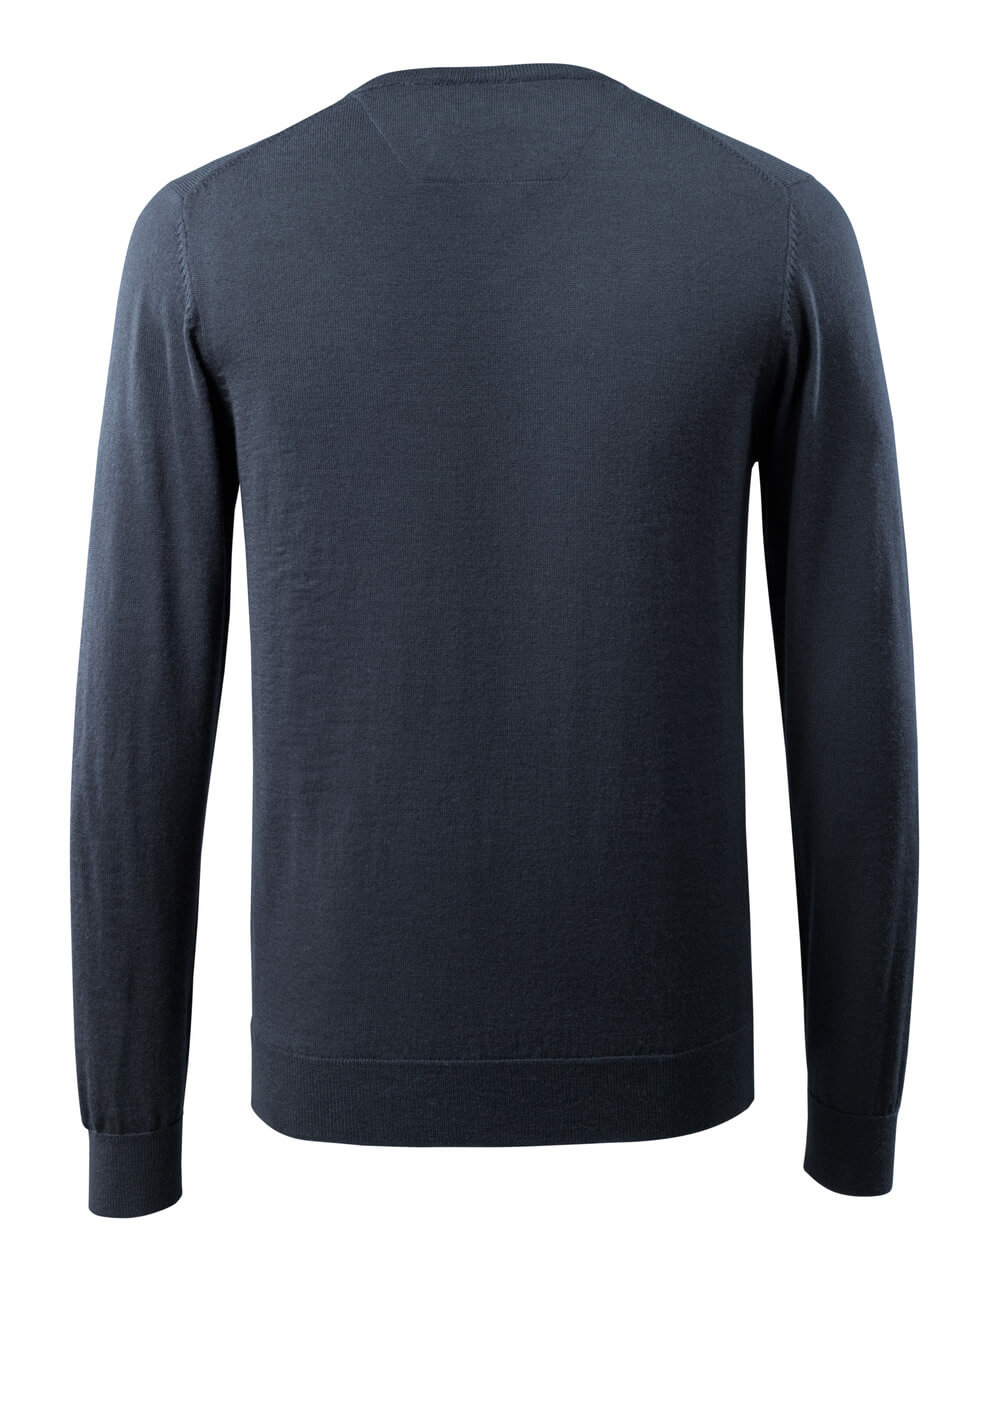 Knitted Jumper v-neck, with merino wool